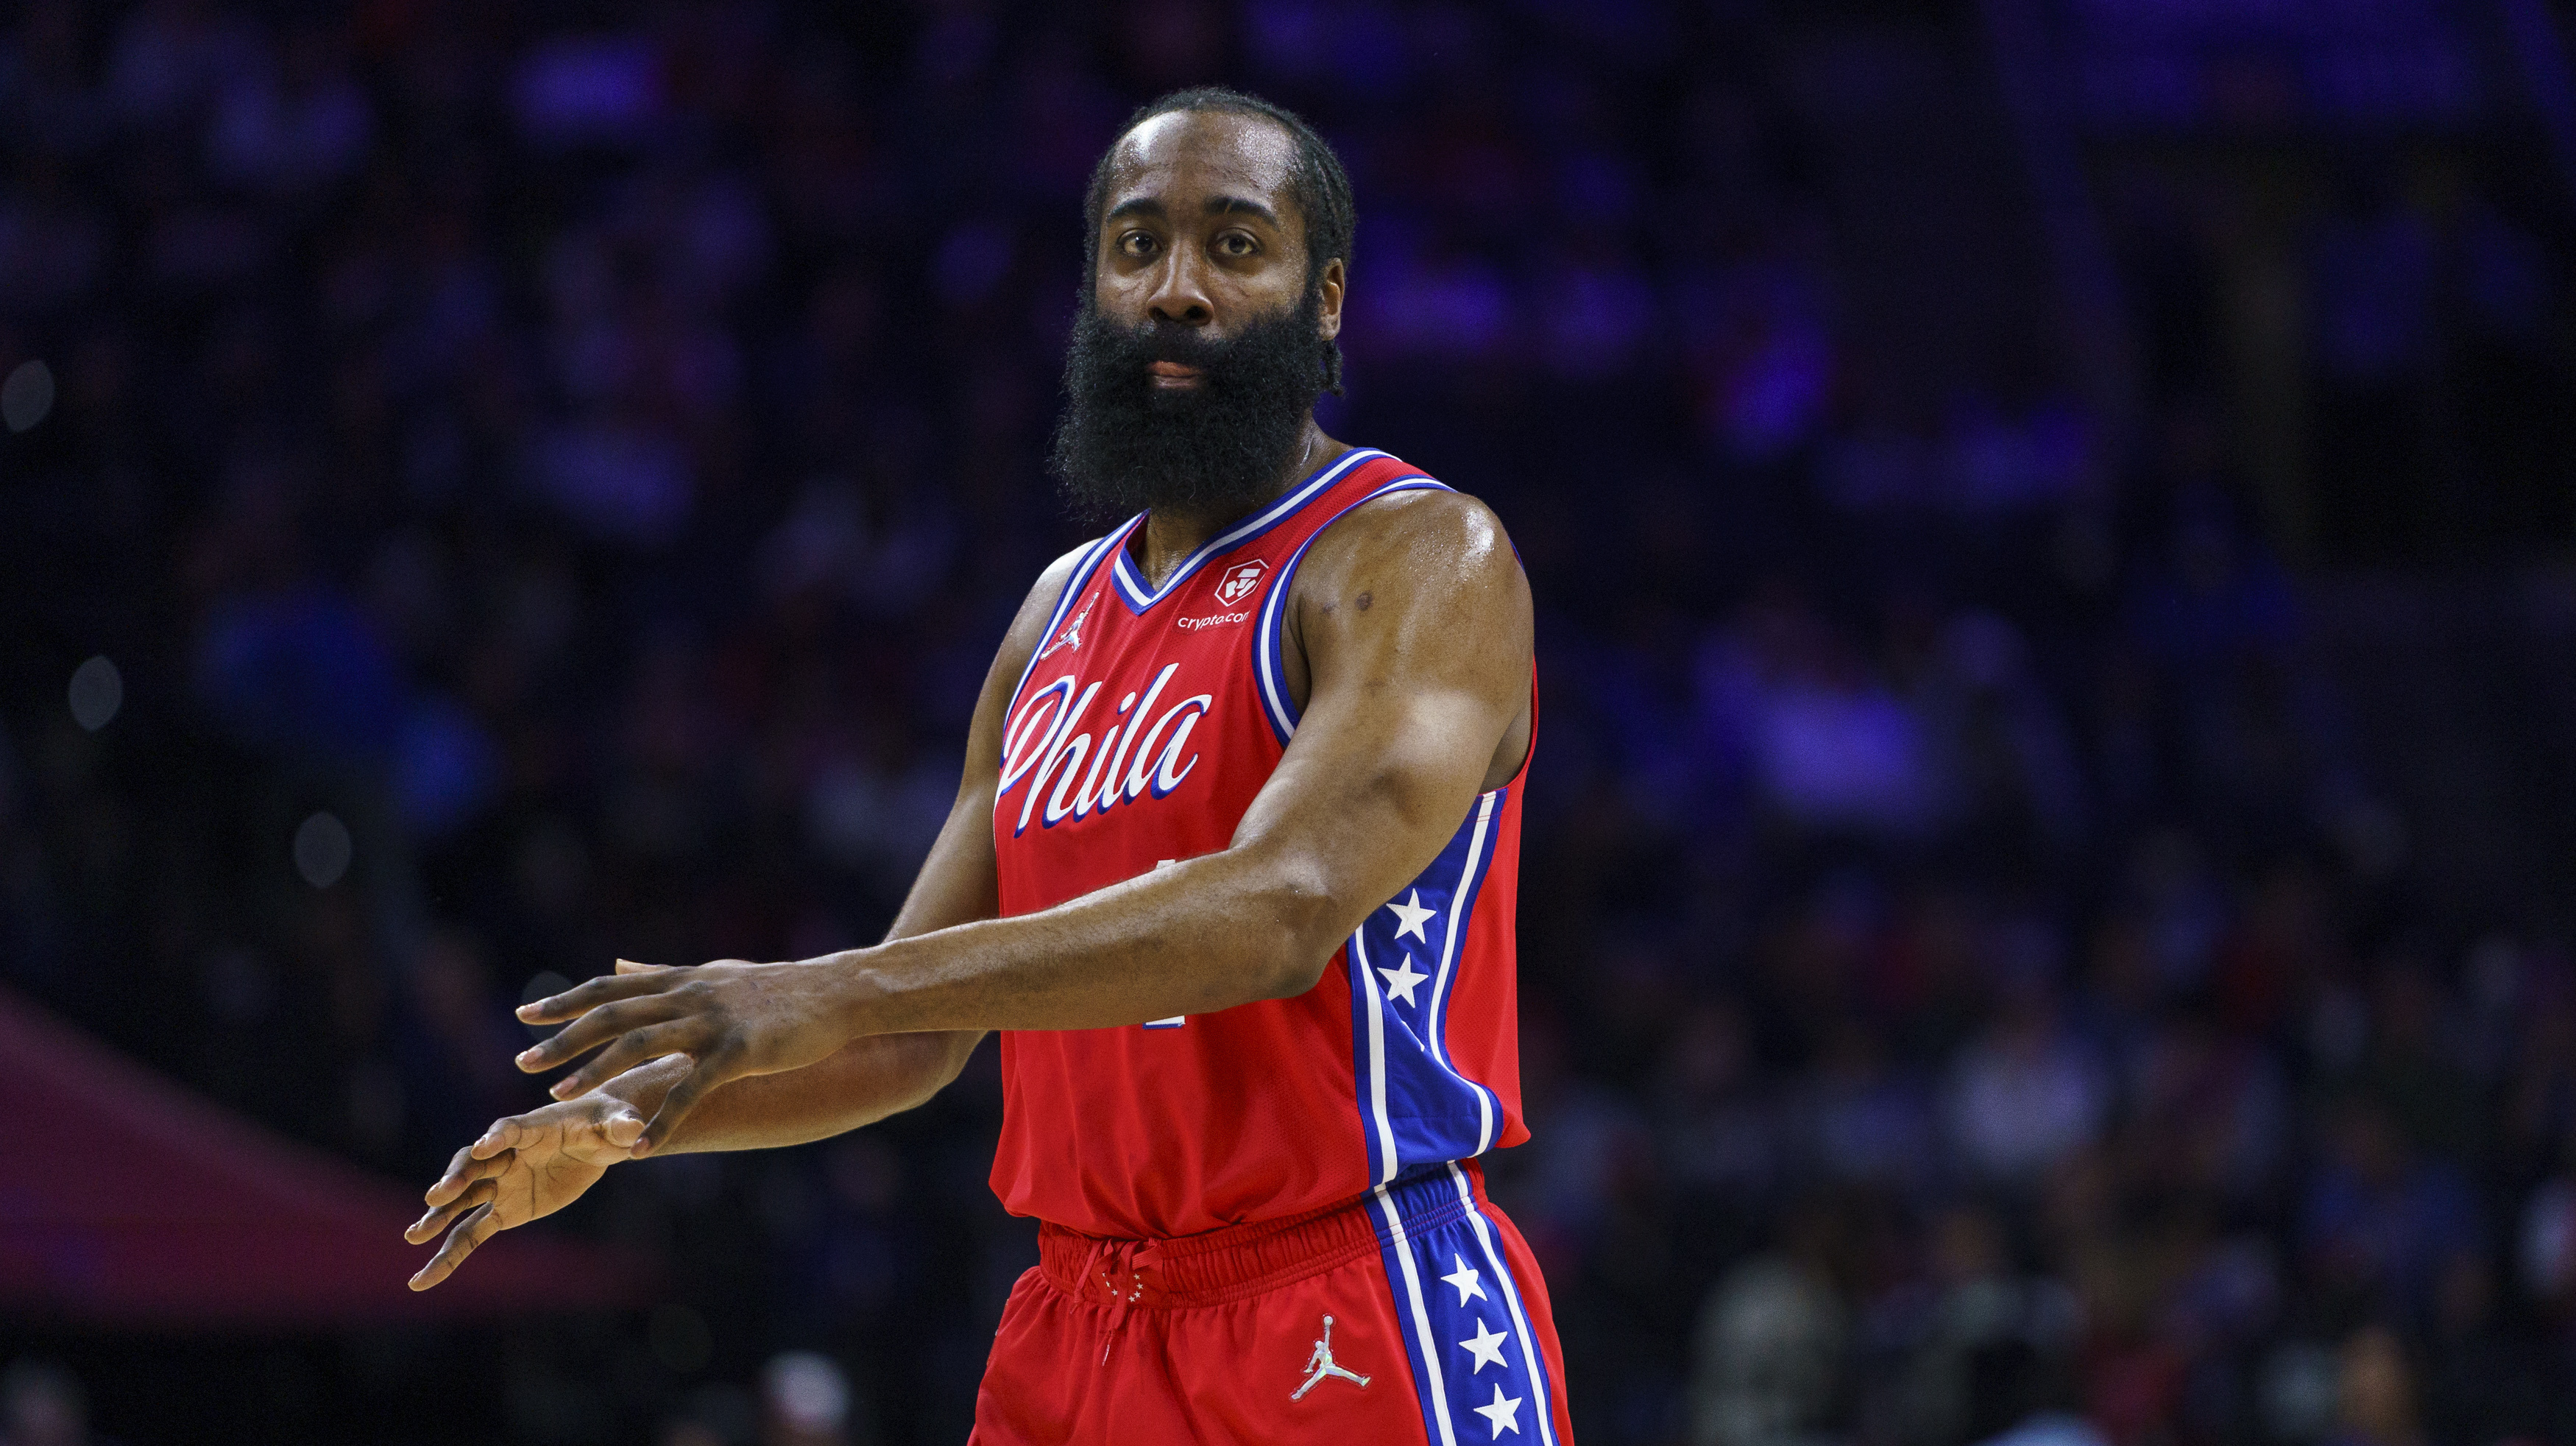 Pressure is on as James Harden saddles in next to another All-Star teammate